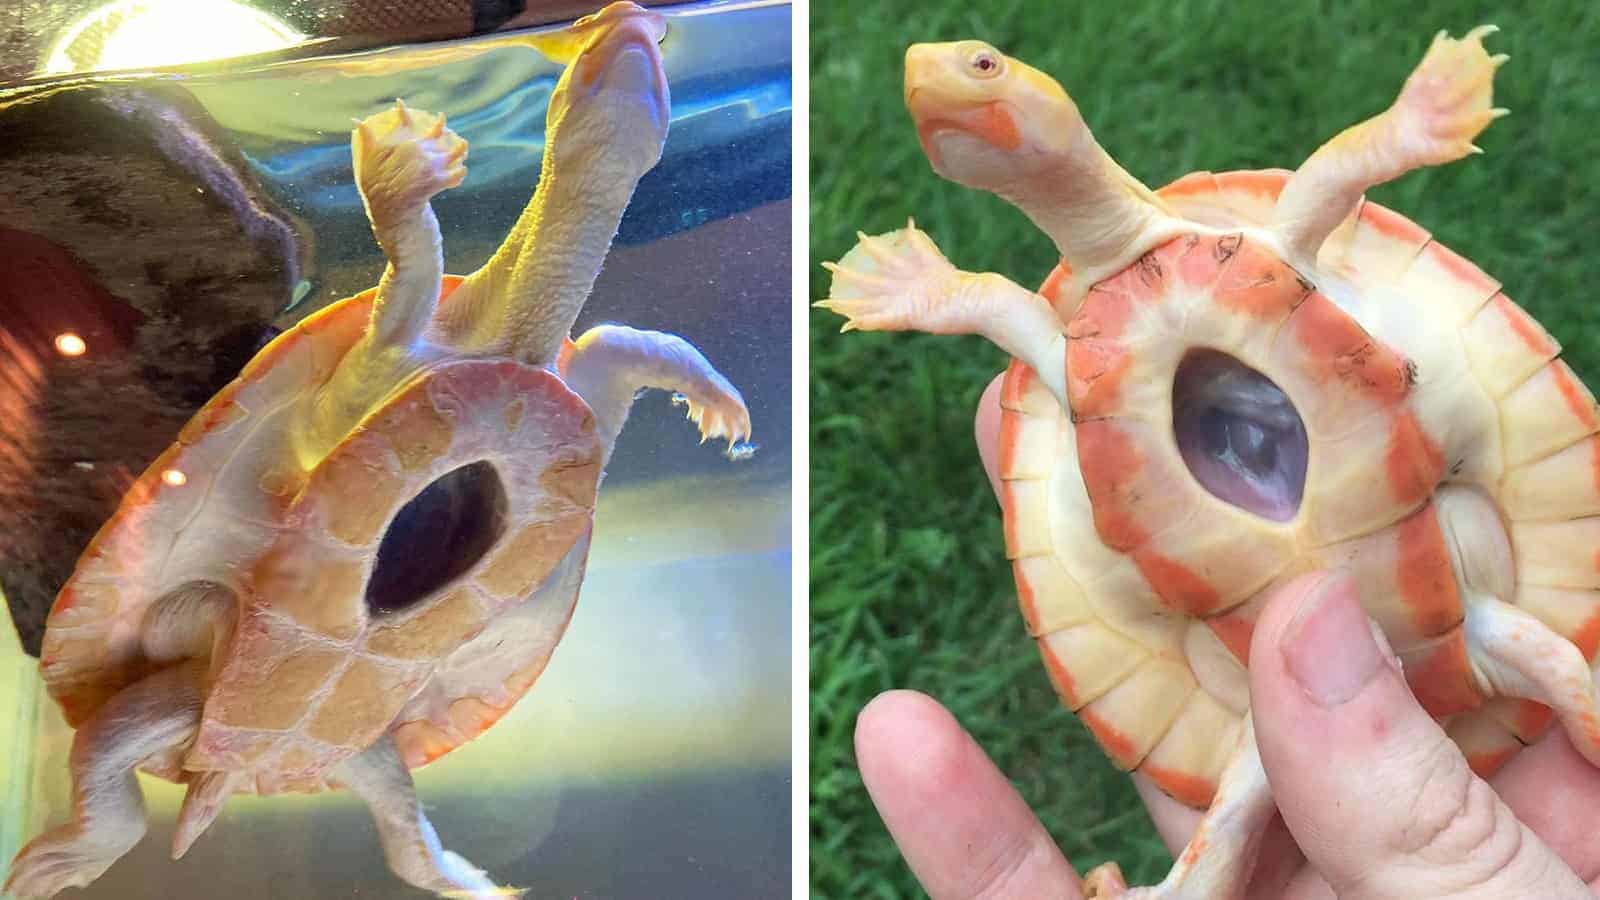 Man Adopts a Tiny Turtle With a Window to its Heart